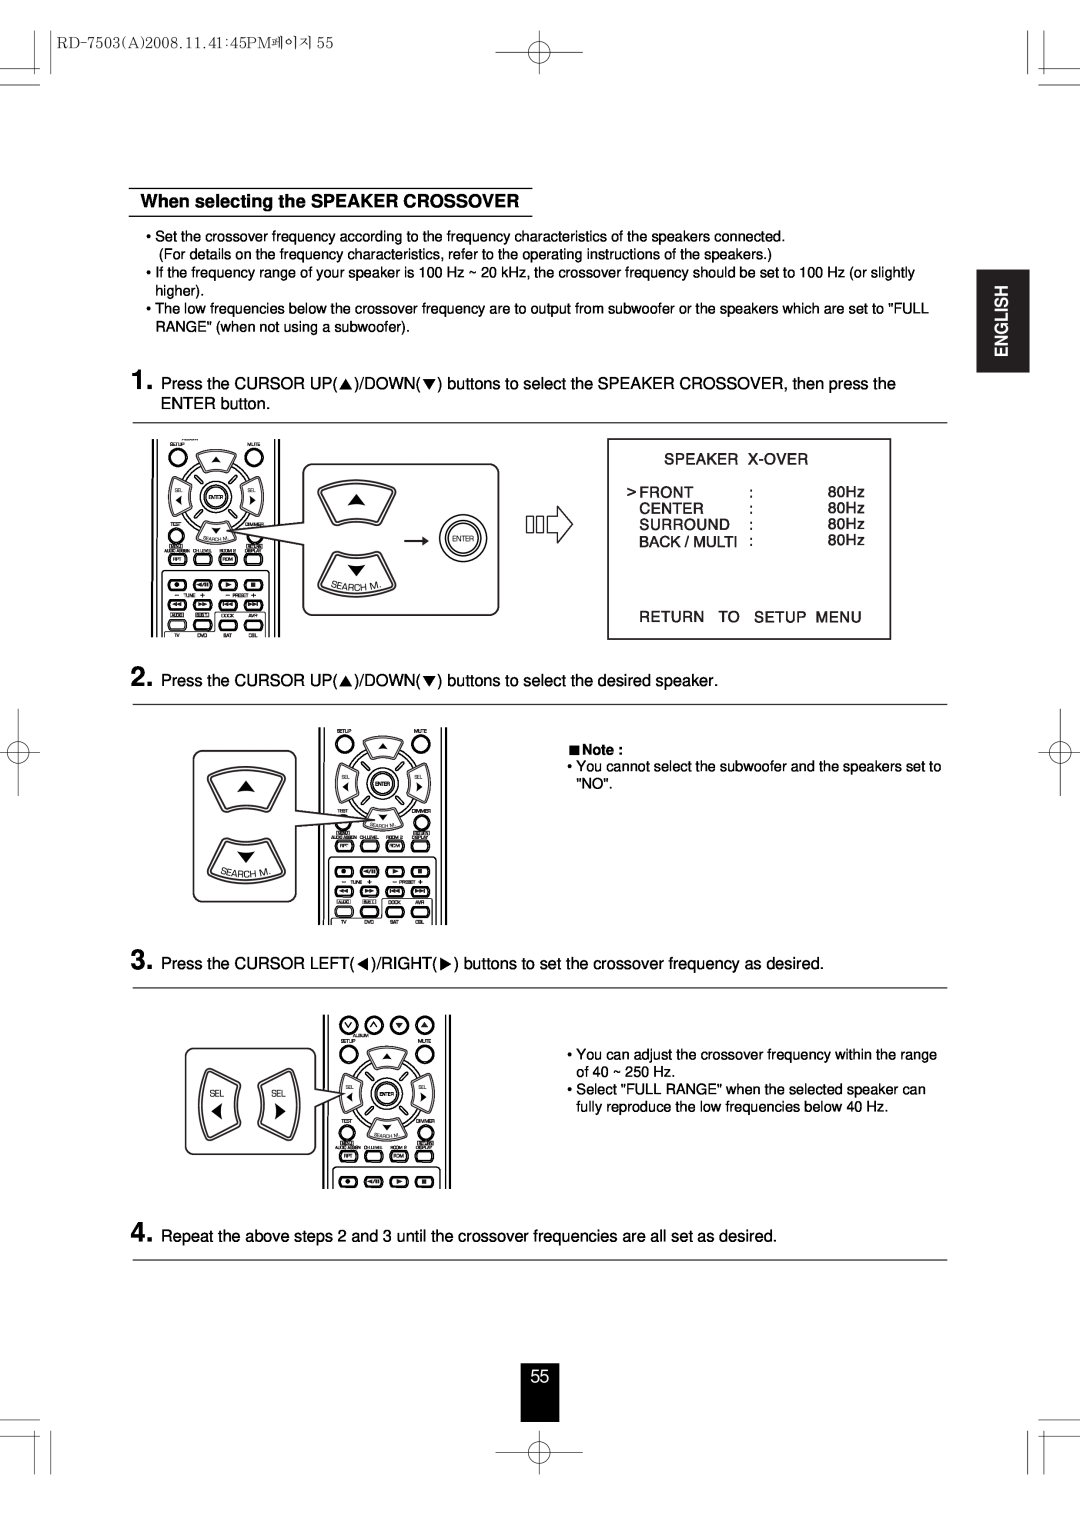 Sherwood RD-7503 manual When selecting the SPEAKER CROSSOVER, English 